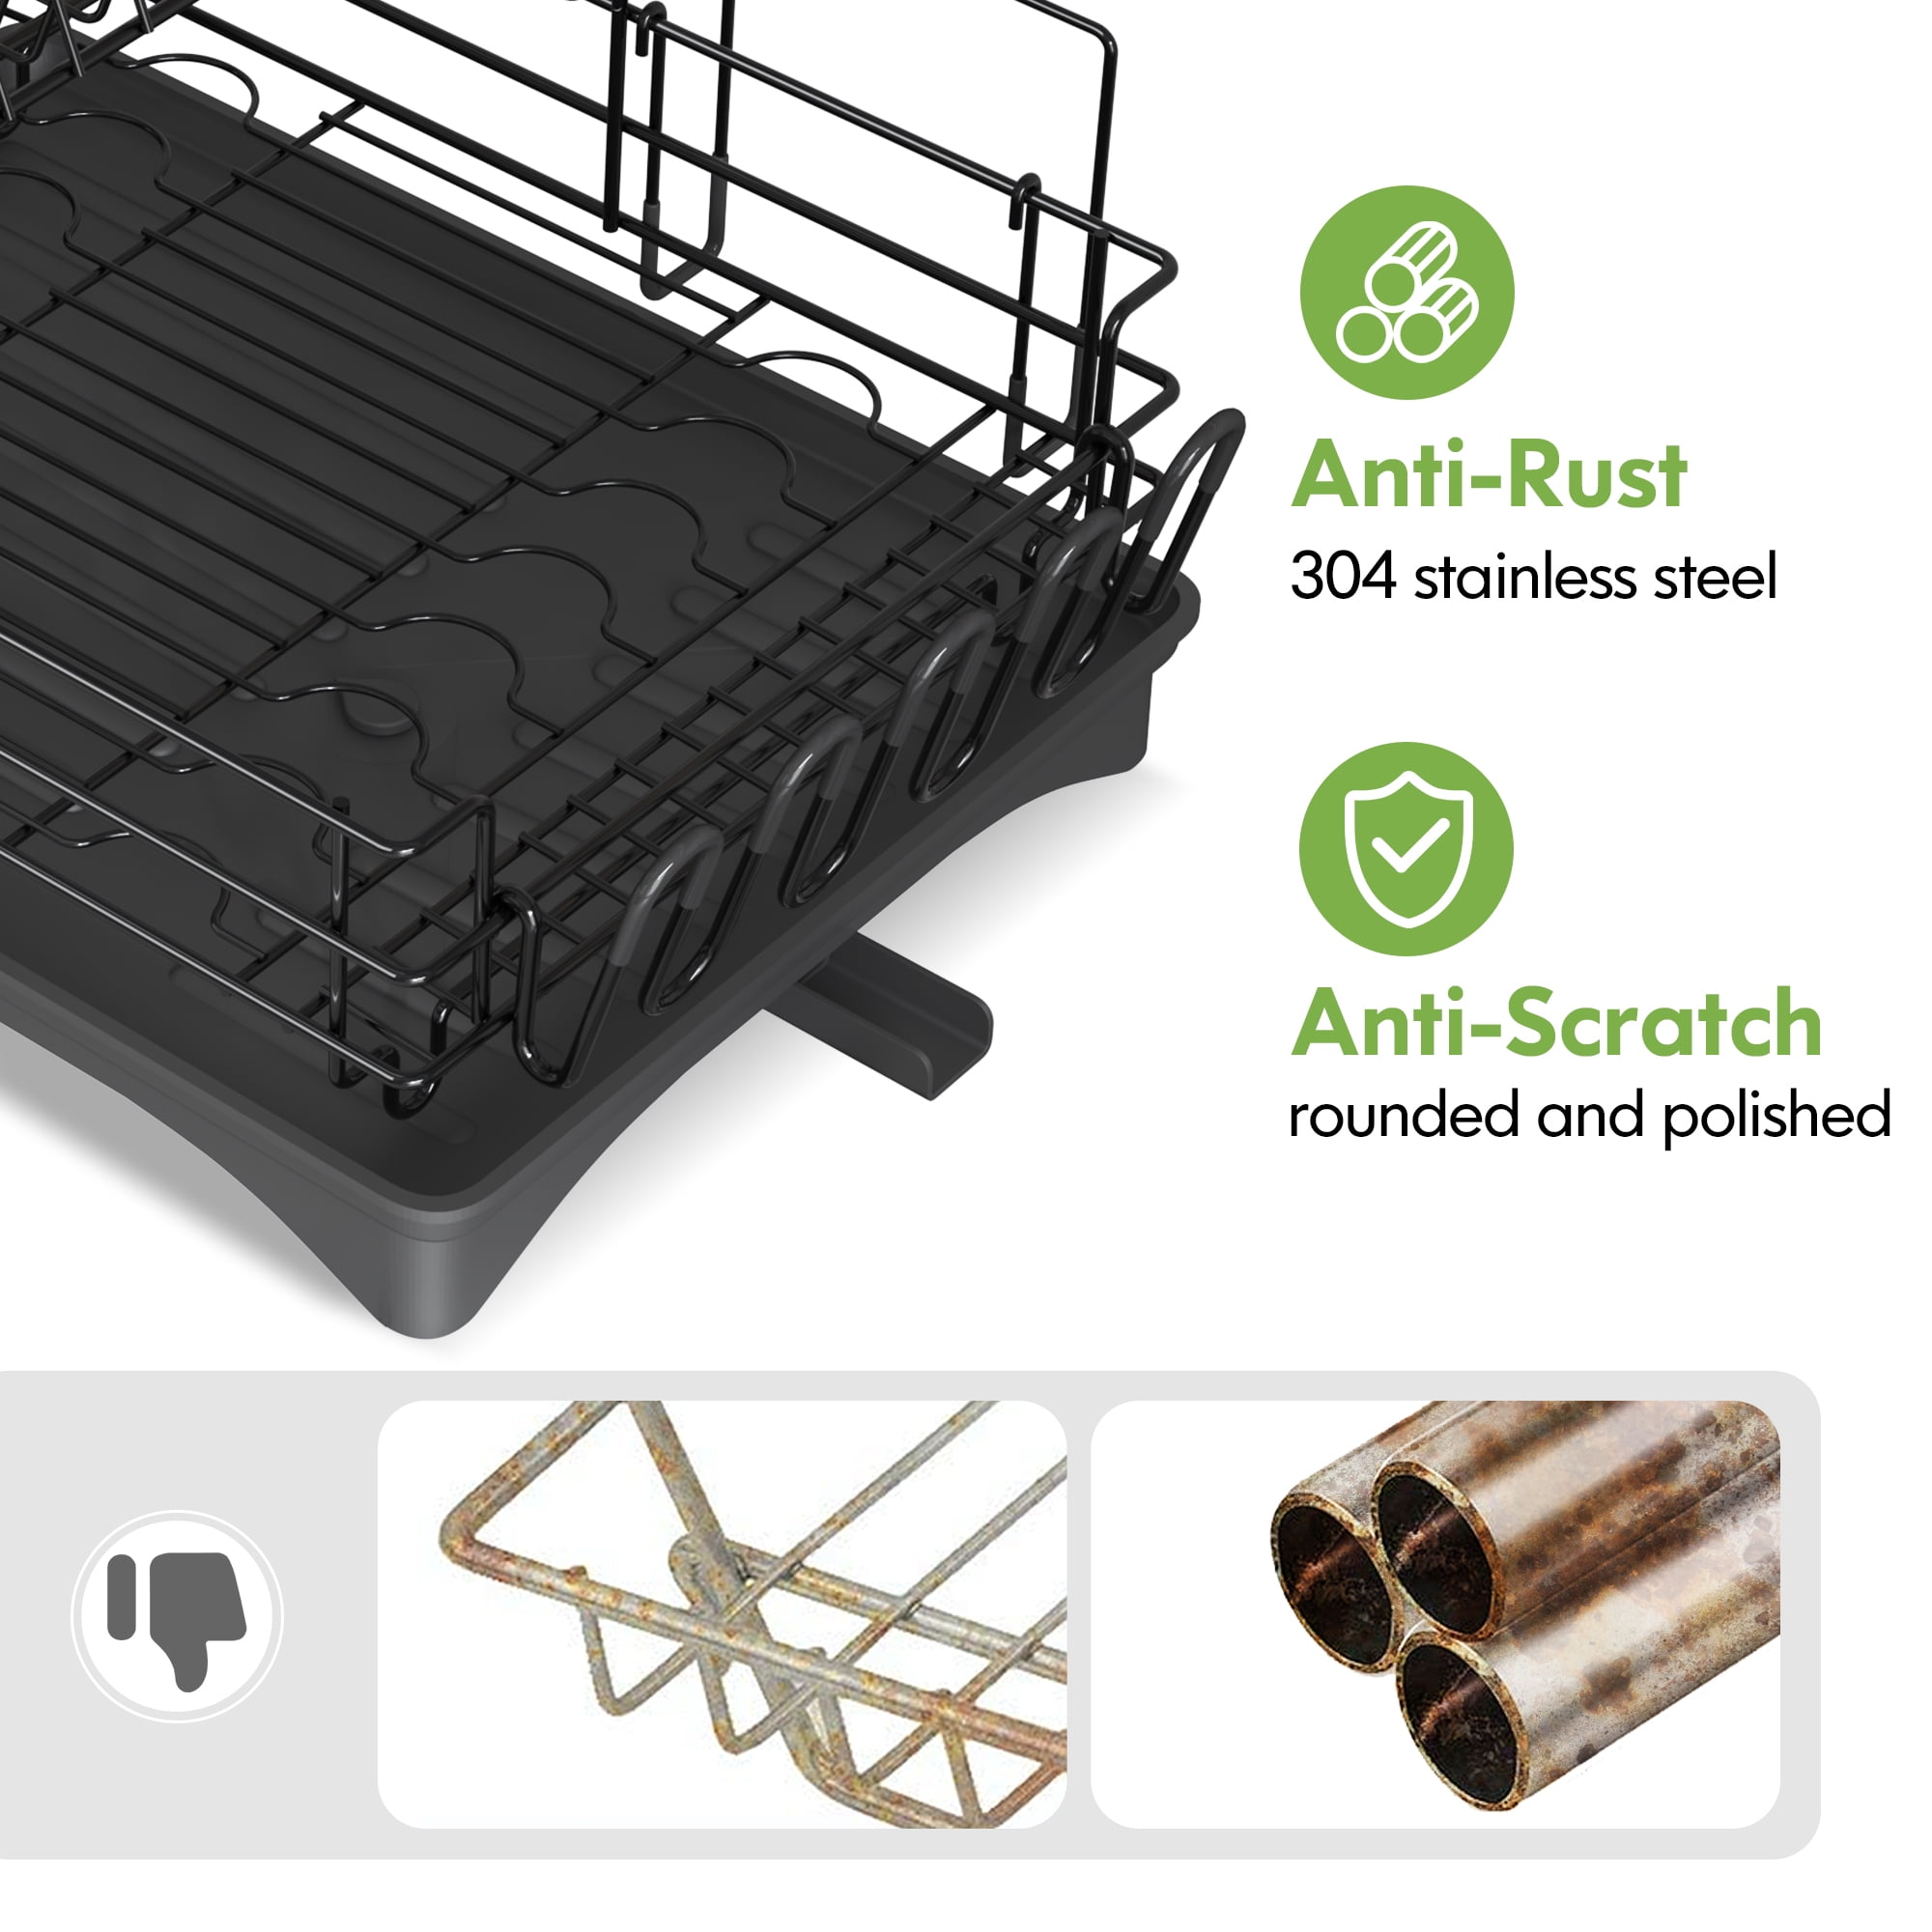 GILLAS Dish Drying Rack, 2 Tier Dish Racks for Kitchen Counter, Large  Capacity Dish Drainers with drainboard Set, Utensils Holder, Glass Holder